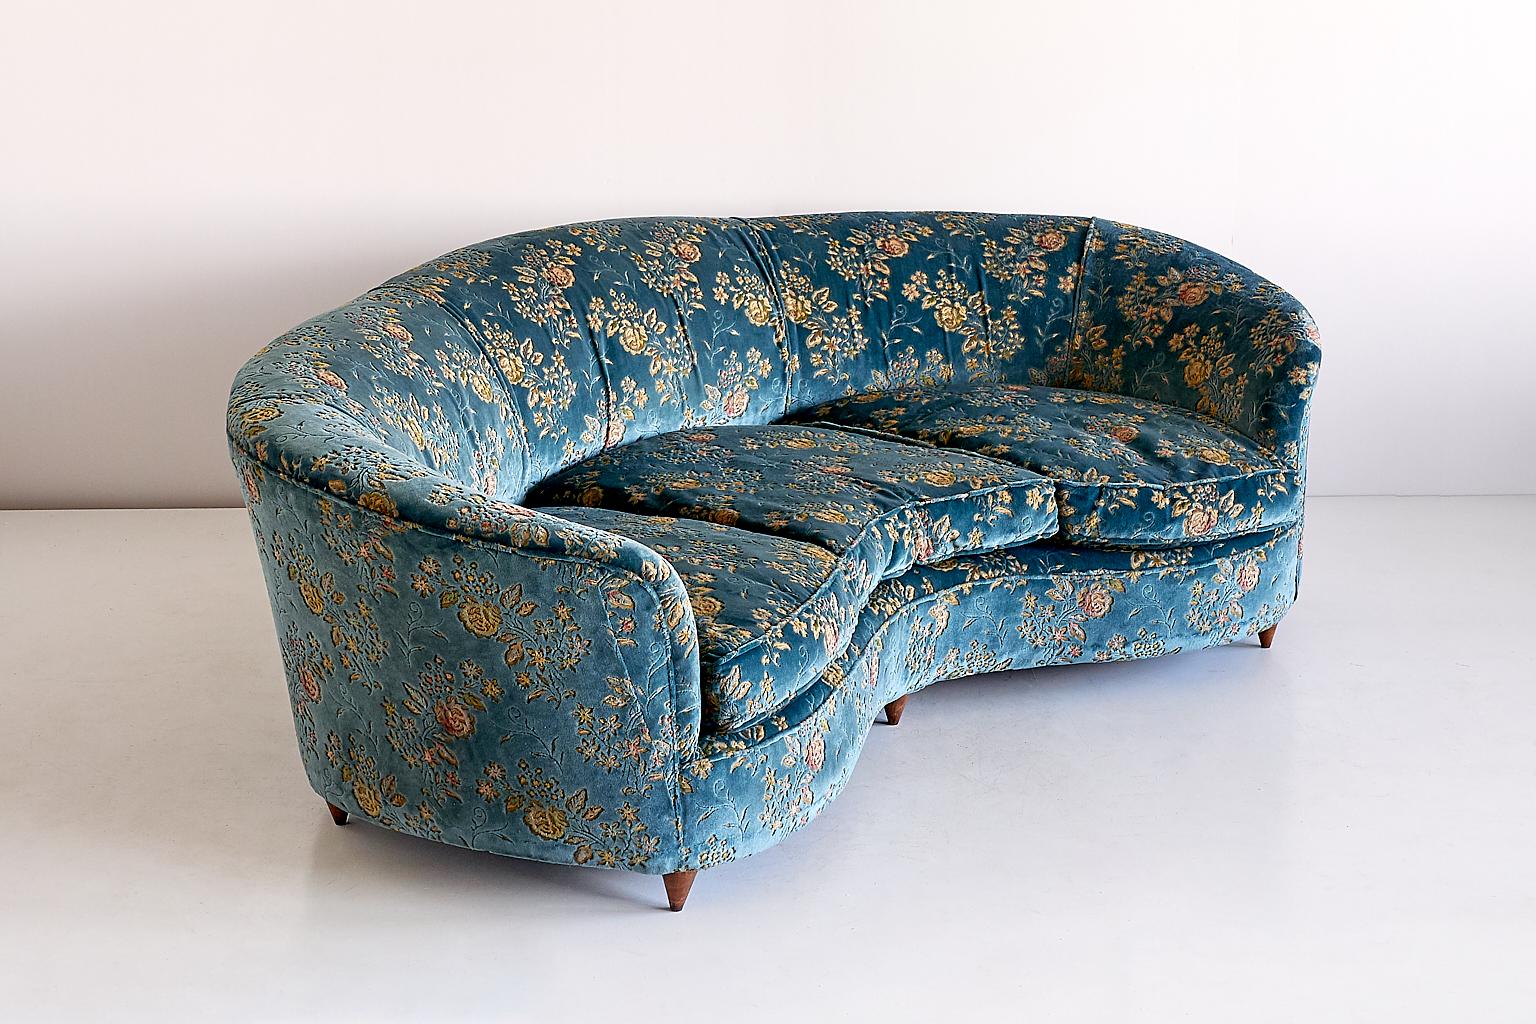 Large Gio Ponti Attributed Curved Sofa in Original Blue Floral Upholstery, 1930s 1